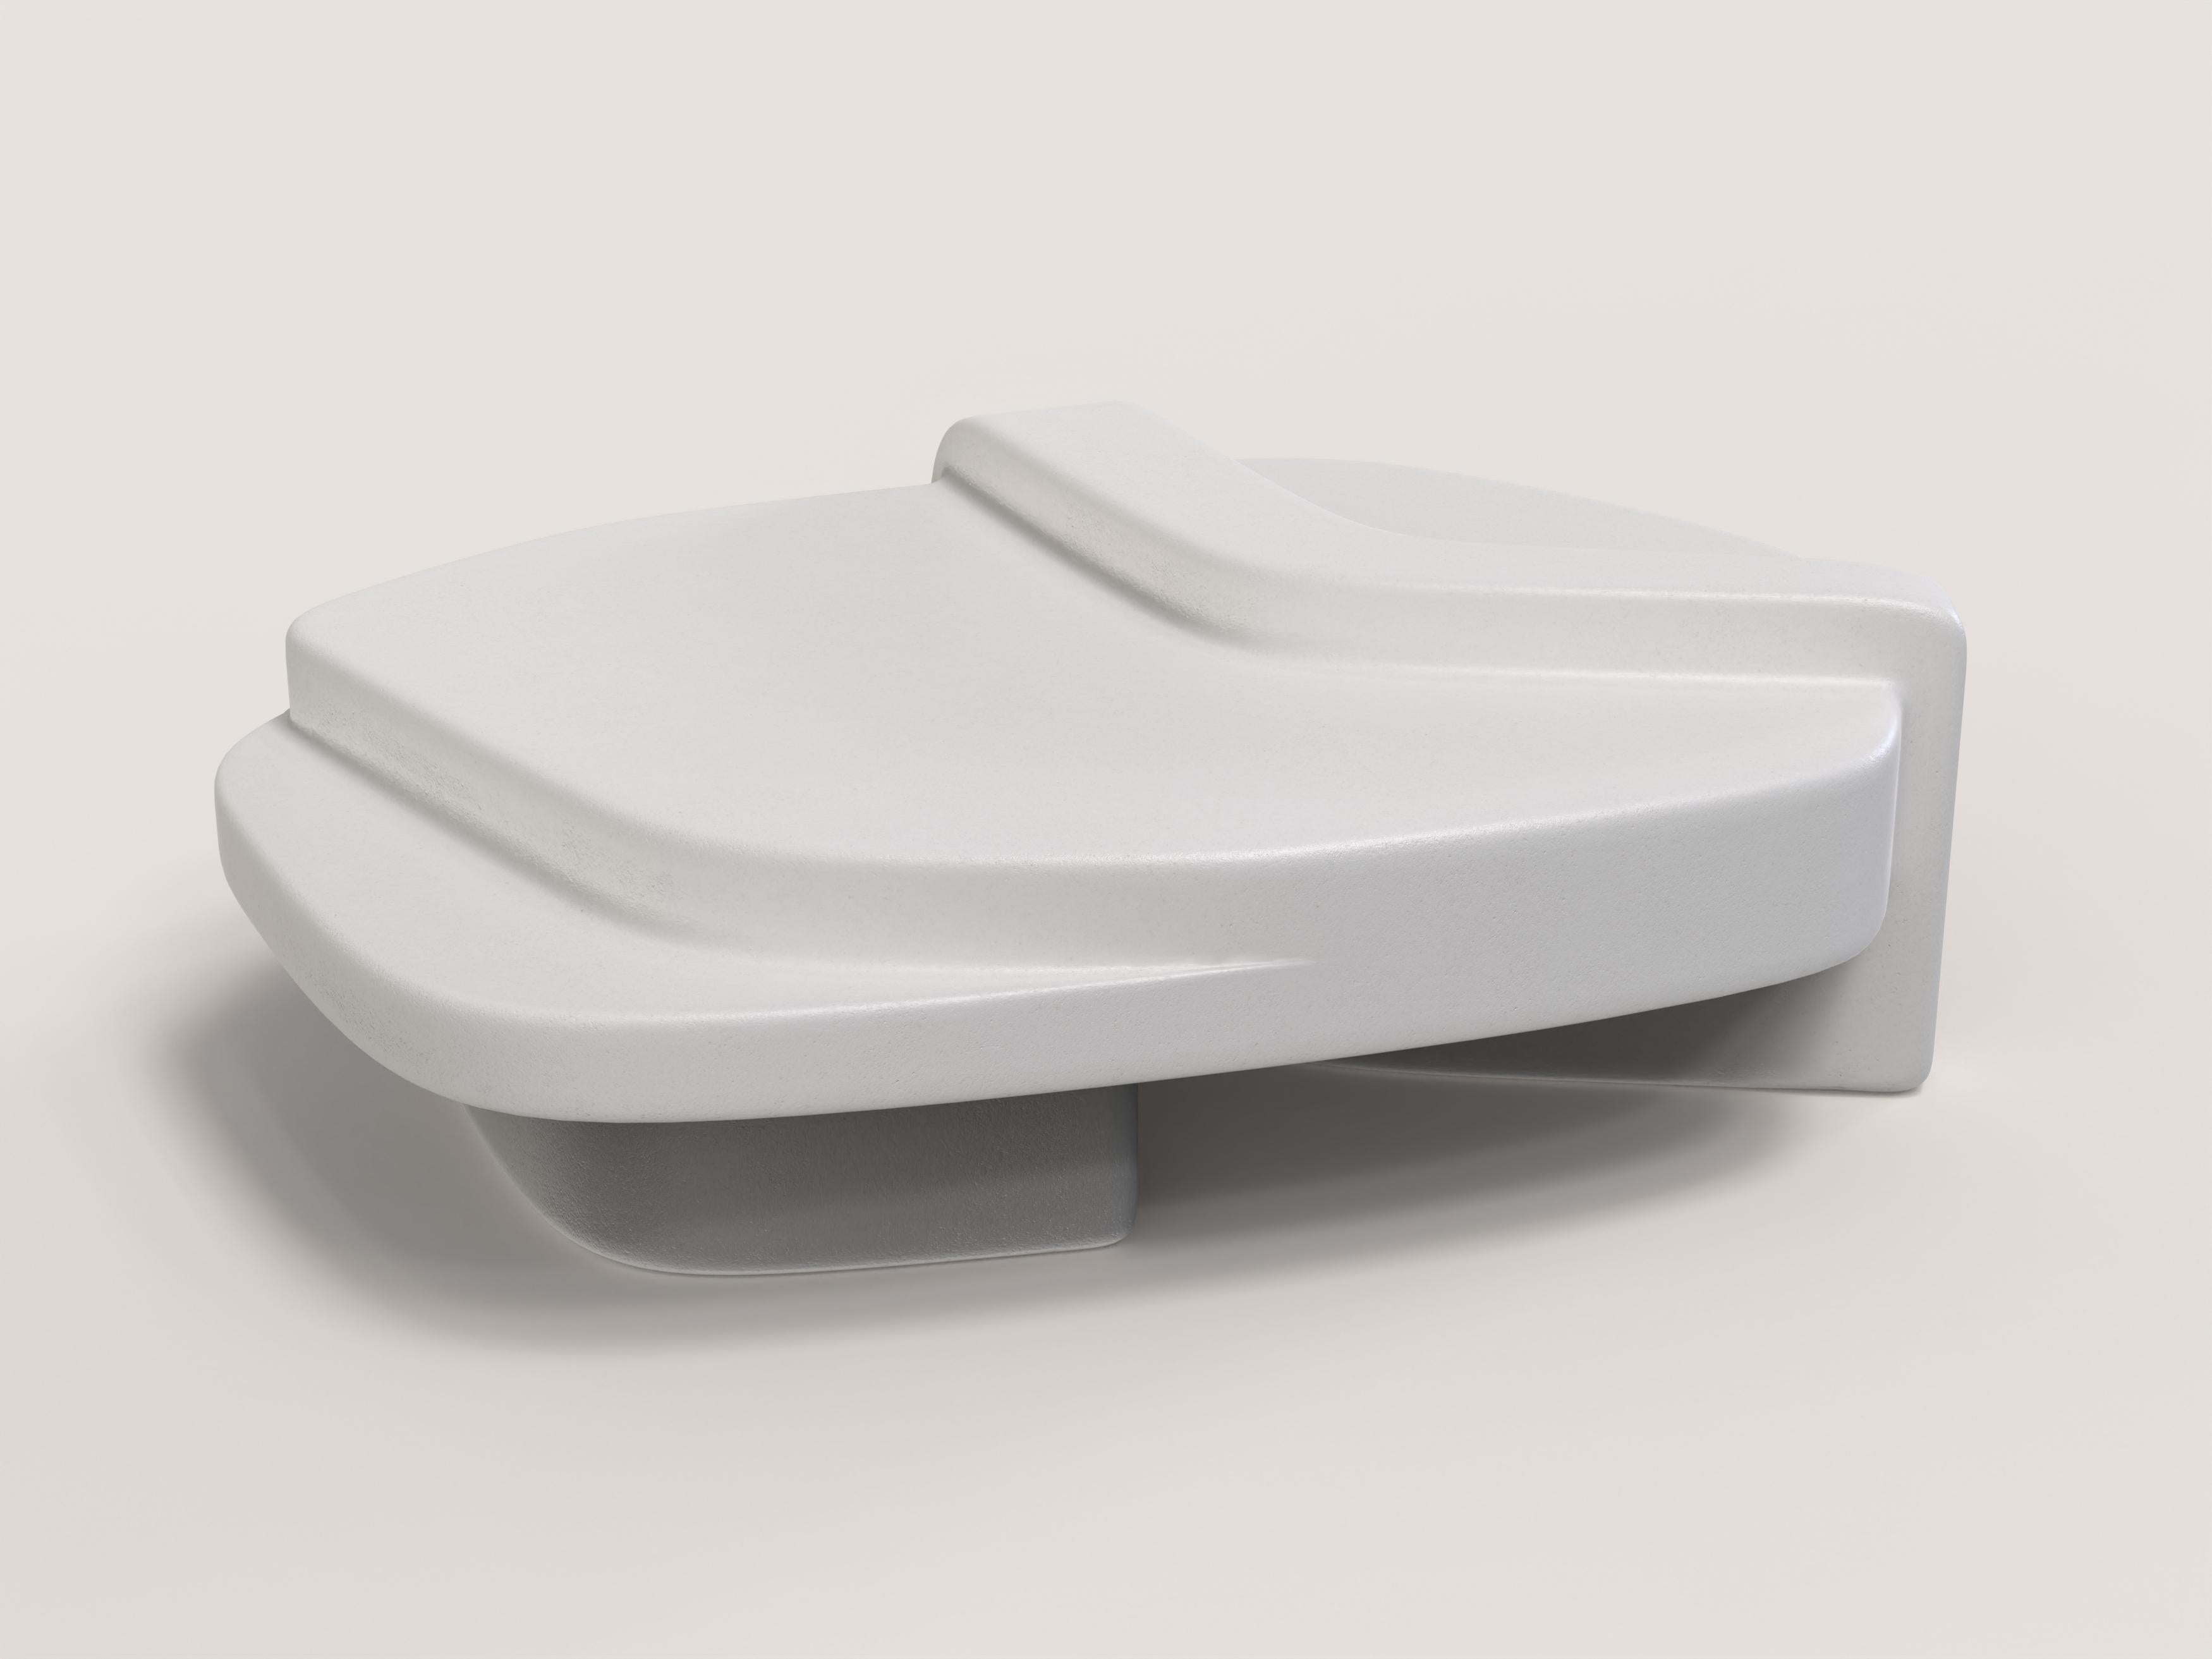 Rodi V2 is a 21st Century white low table made by Italian artisans in painted and spray coated Polystyrene. The piece is manufactured in a limited edition of 150 signed and progressively numbered examples. It is part of the collectible design